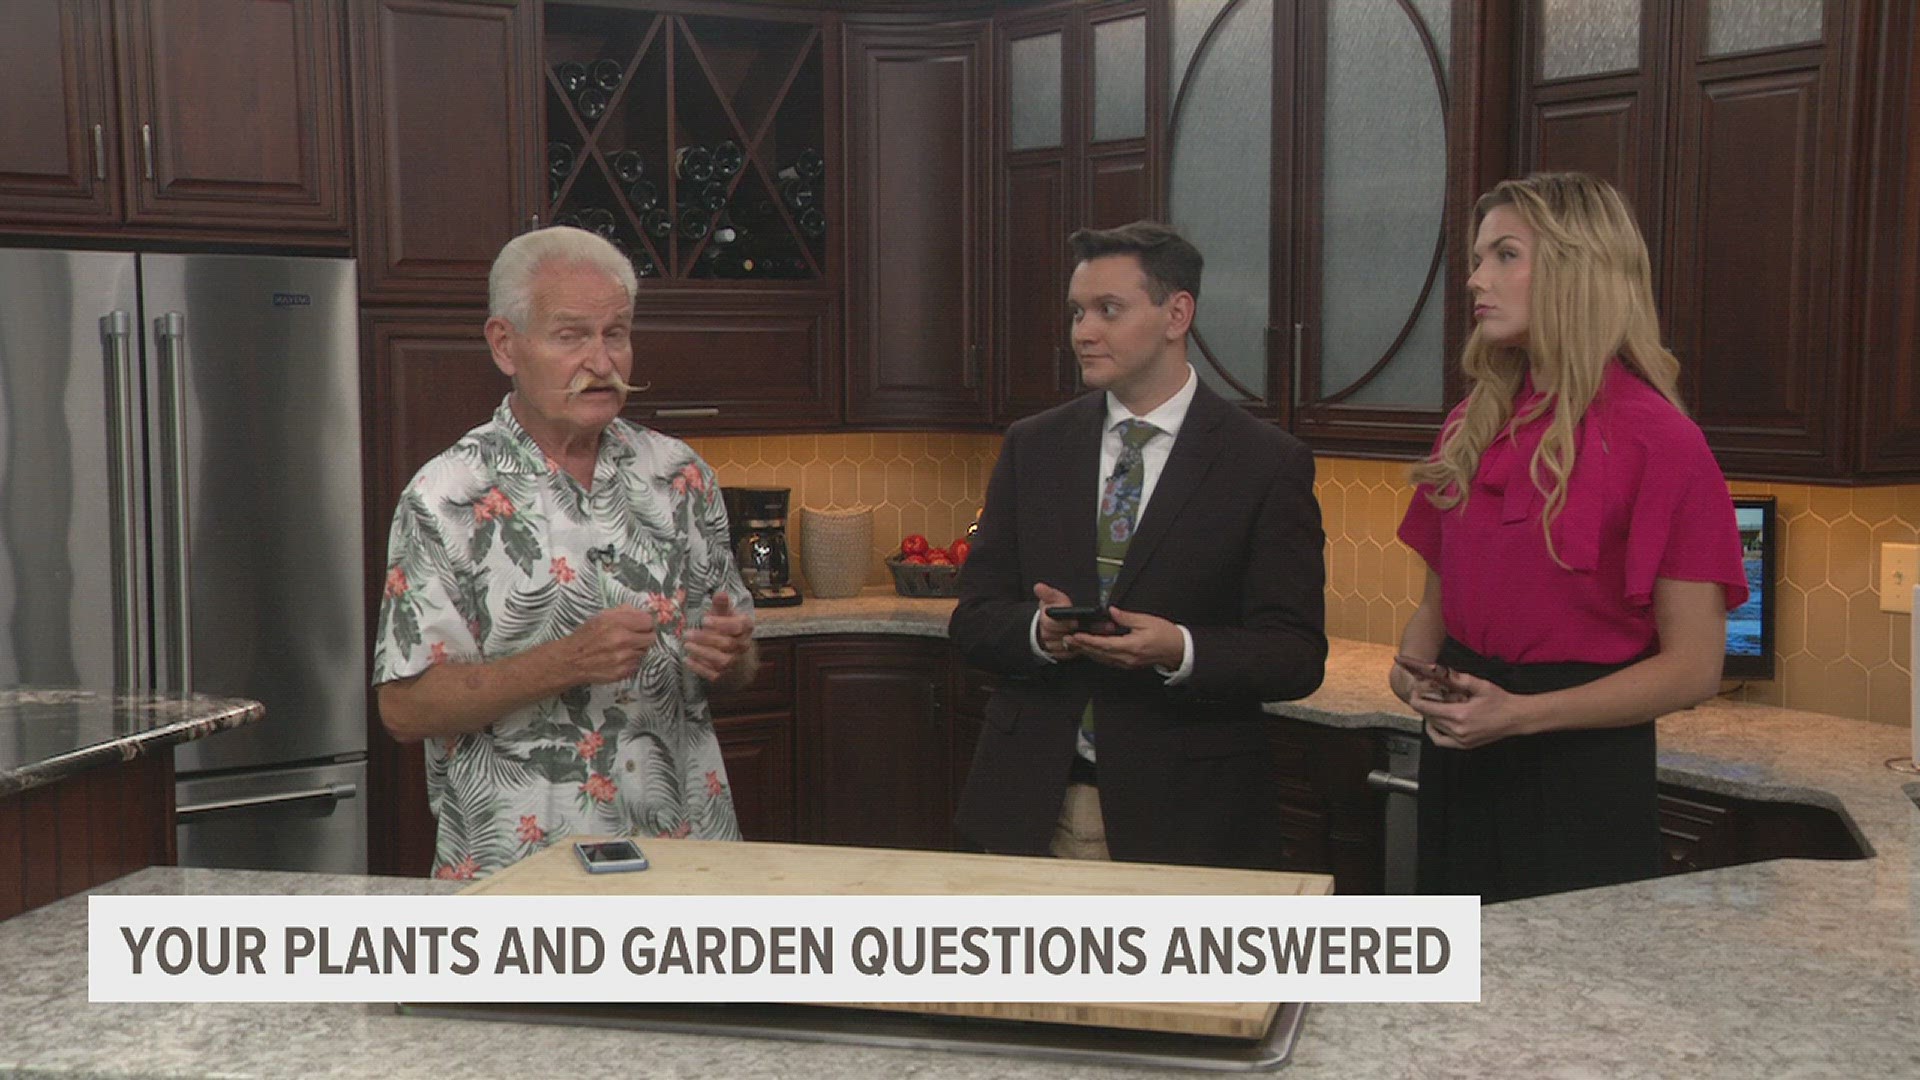 News 8's plants and gardens expert Craig Hignight answers your questions on Facebook Live.